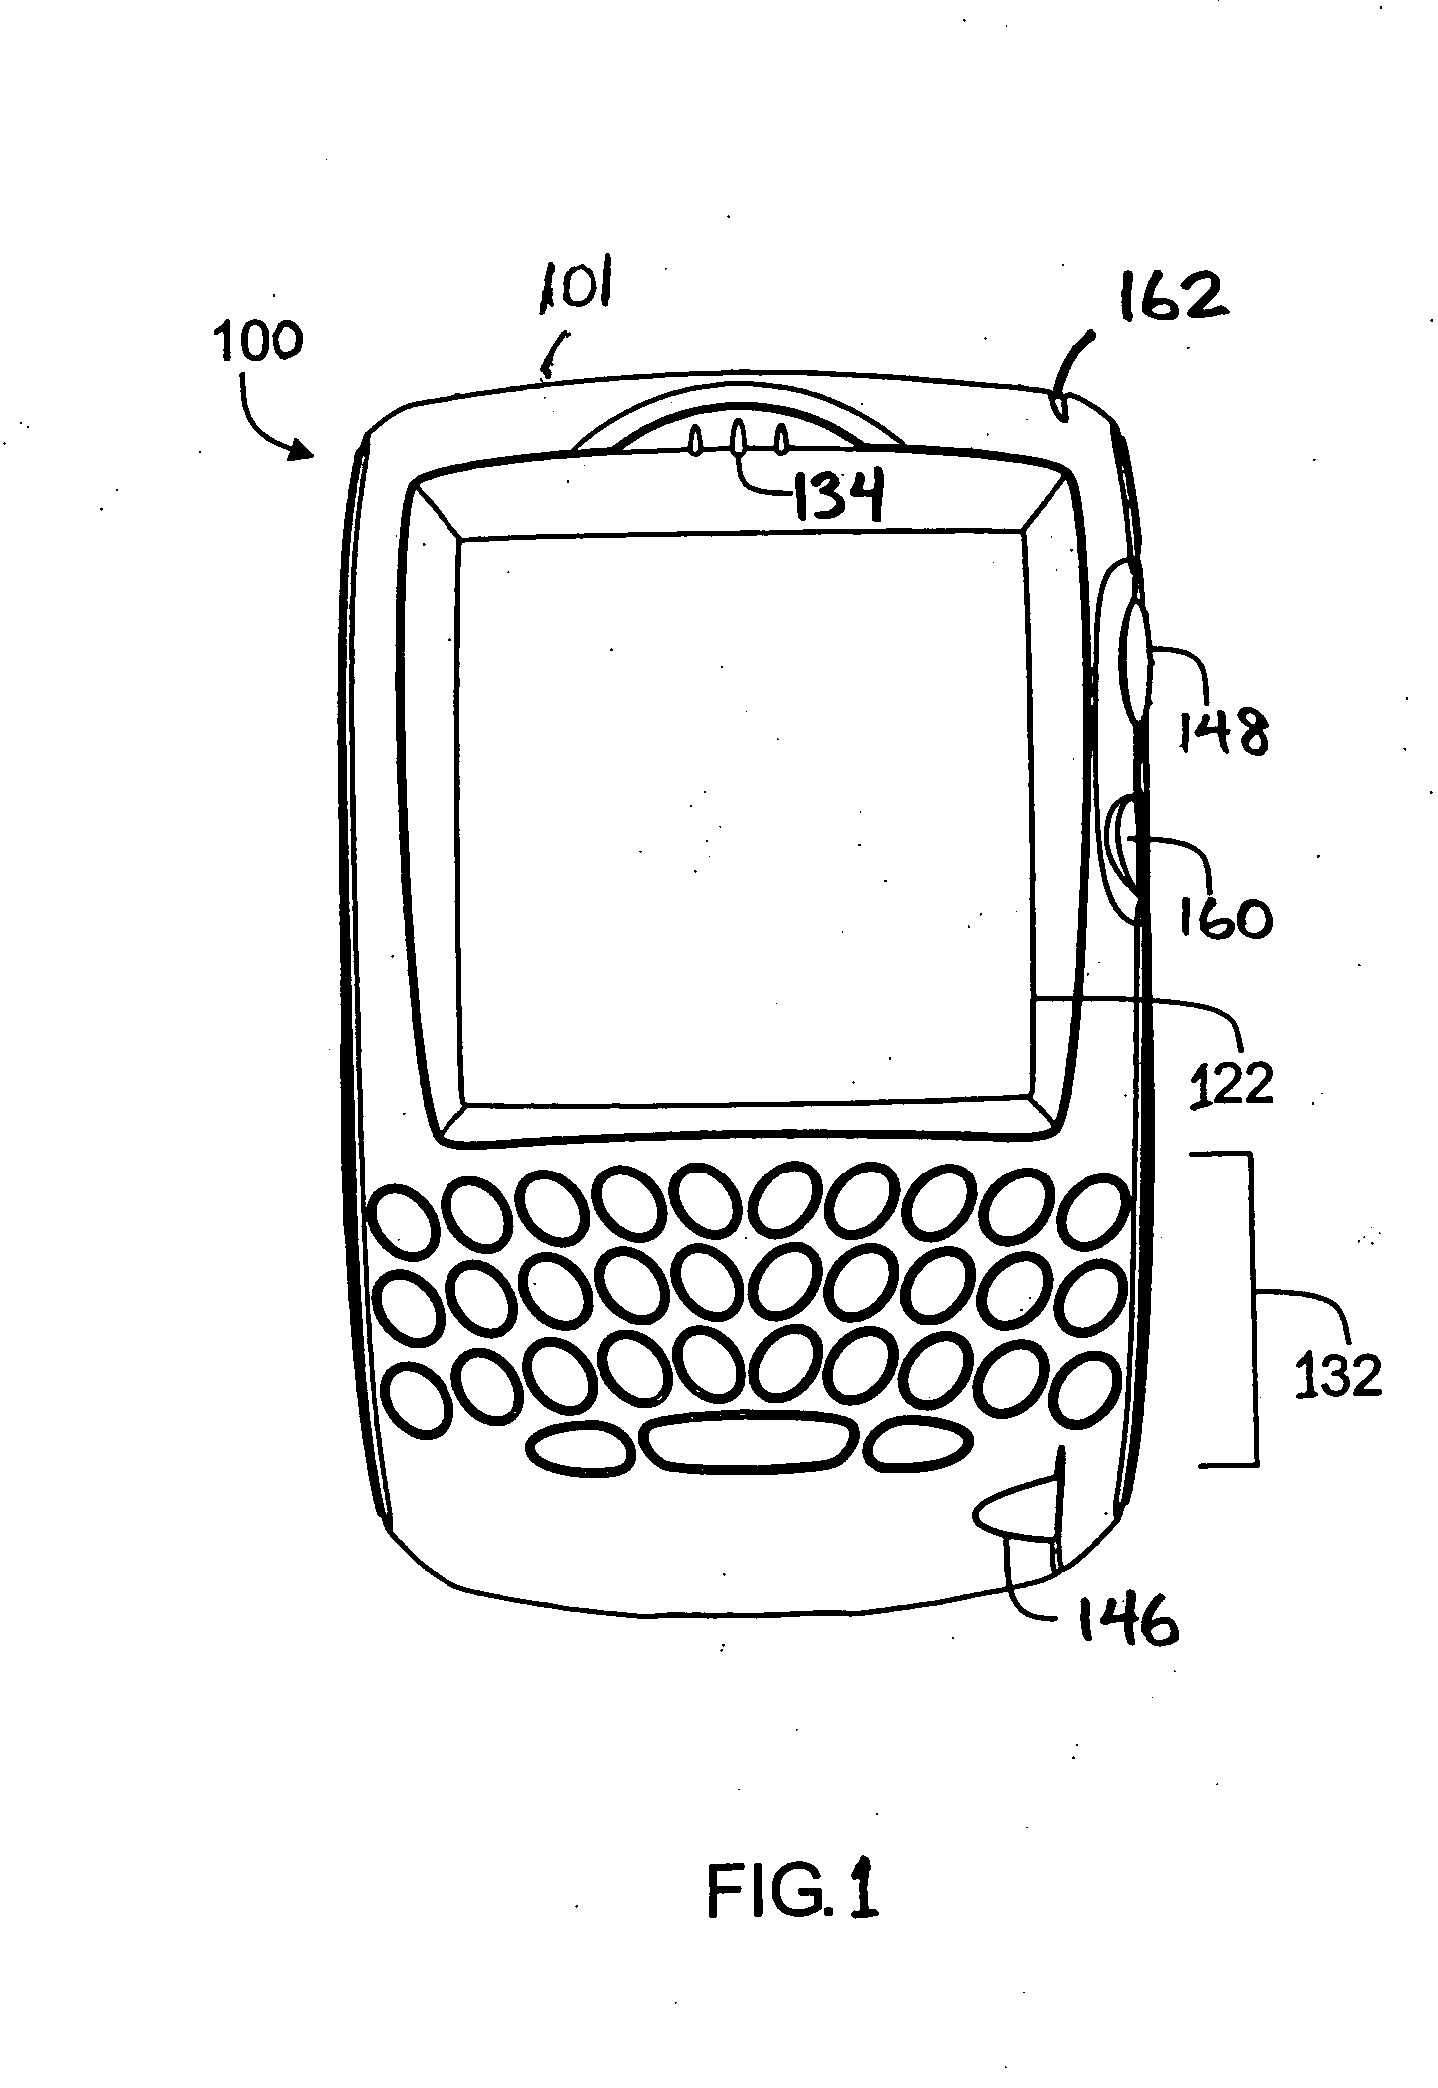 Backlight control for a portable computing device